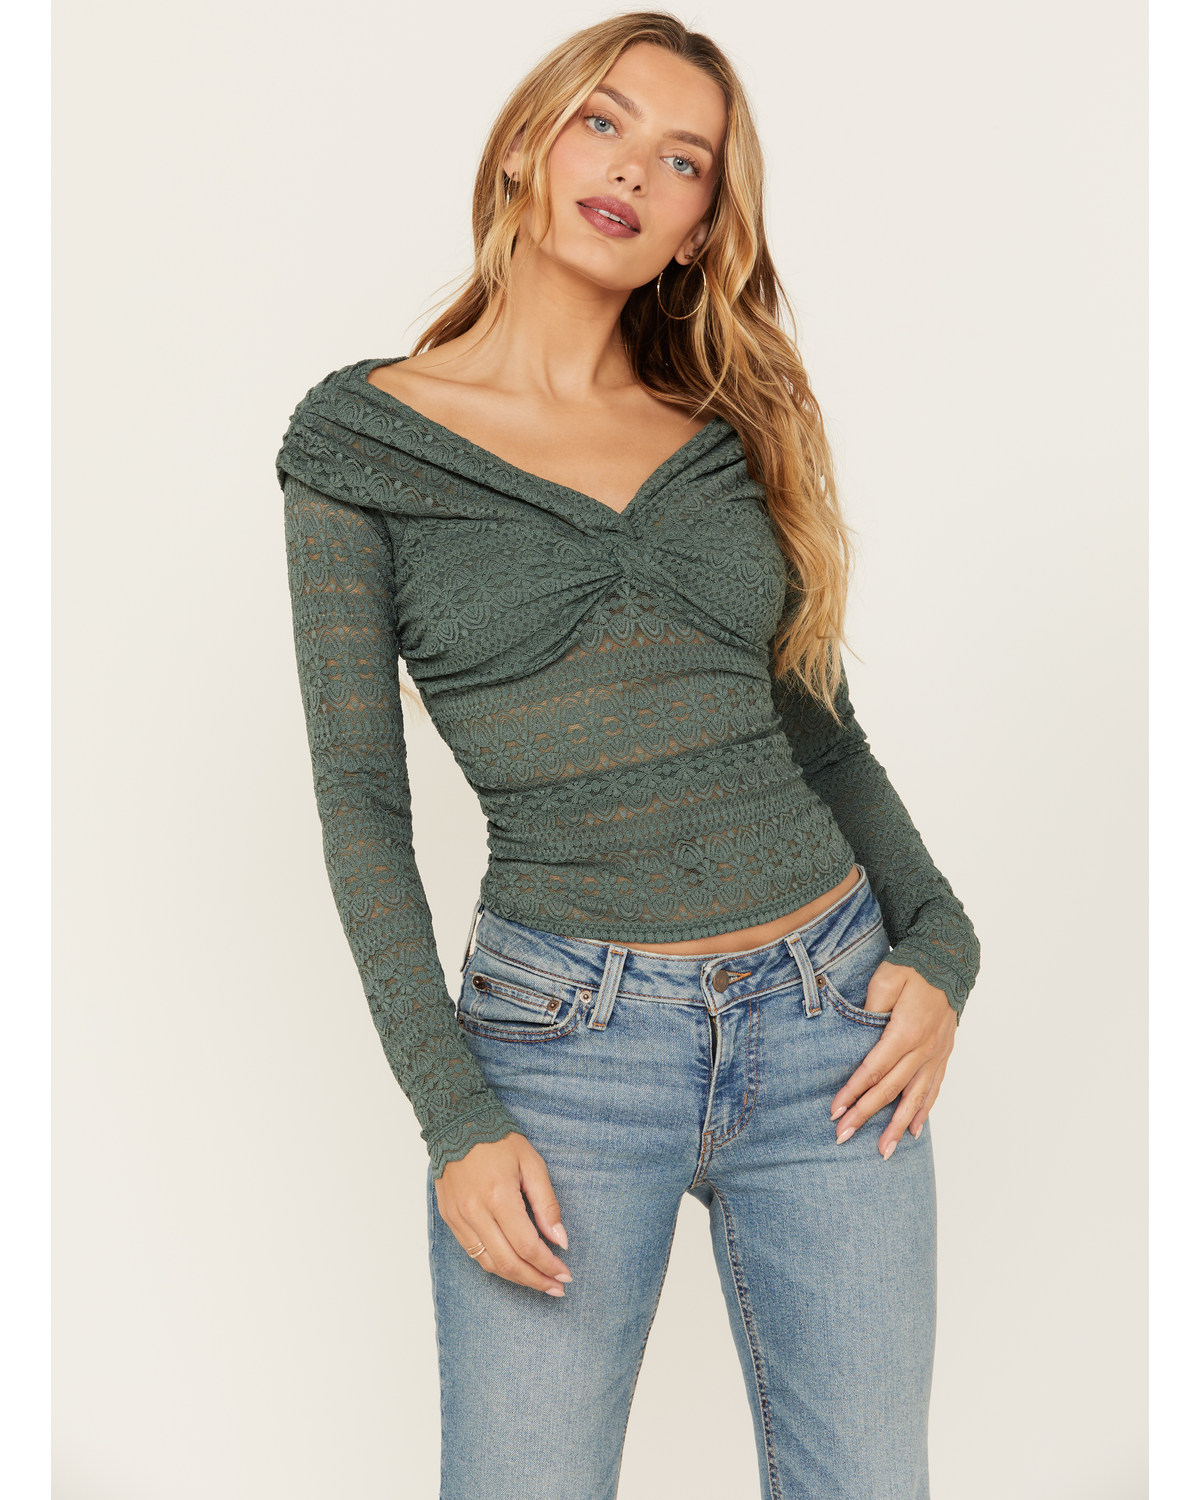 Free People Women's Hold Me Closer Long Sleeve Top